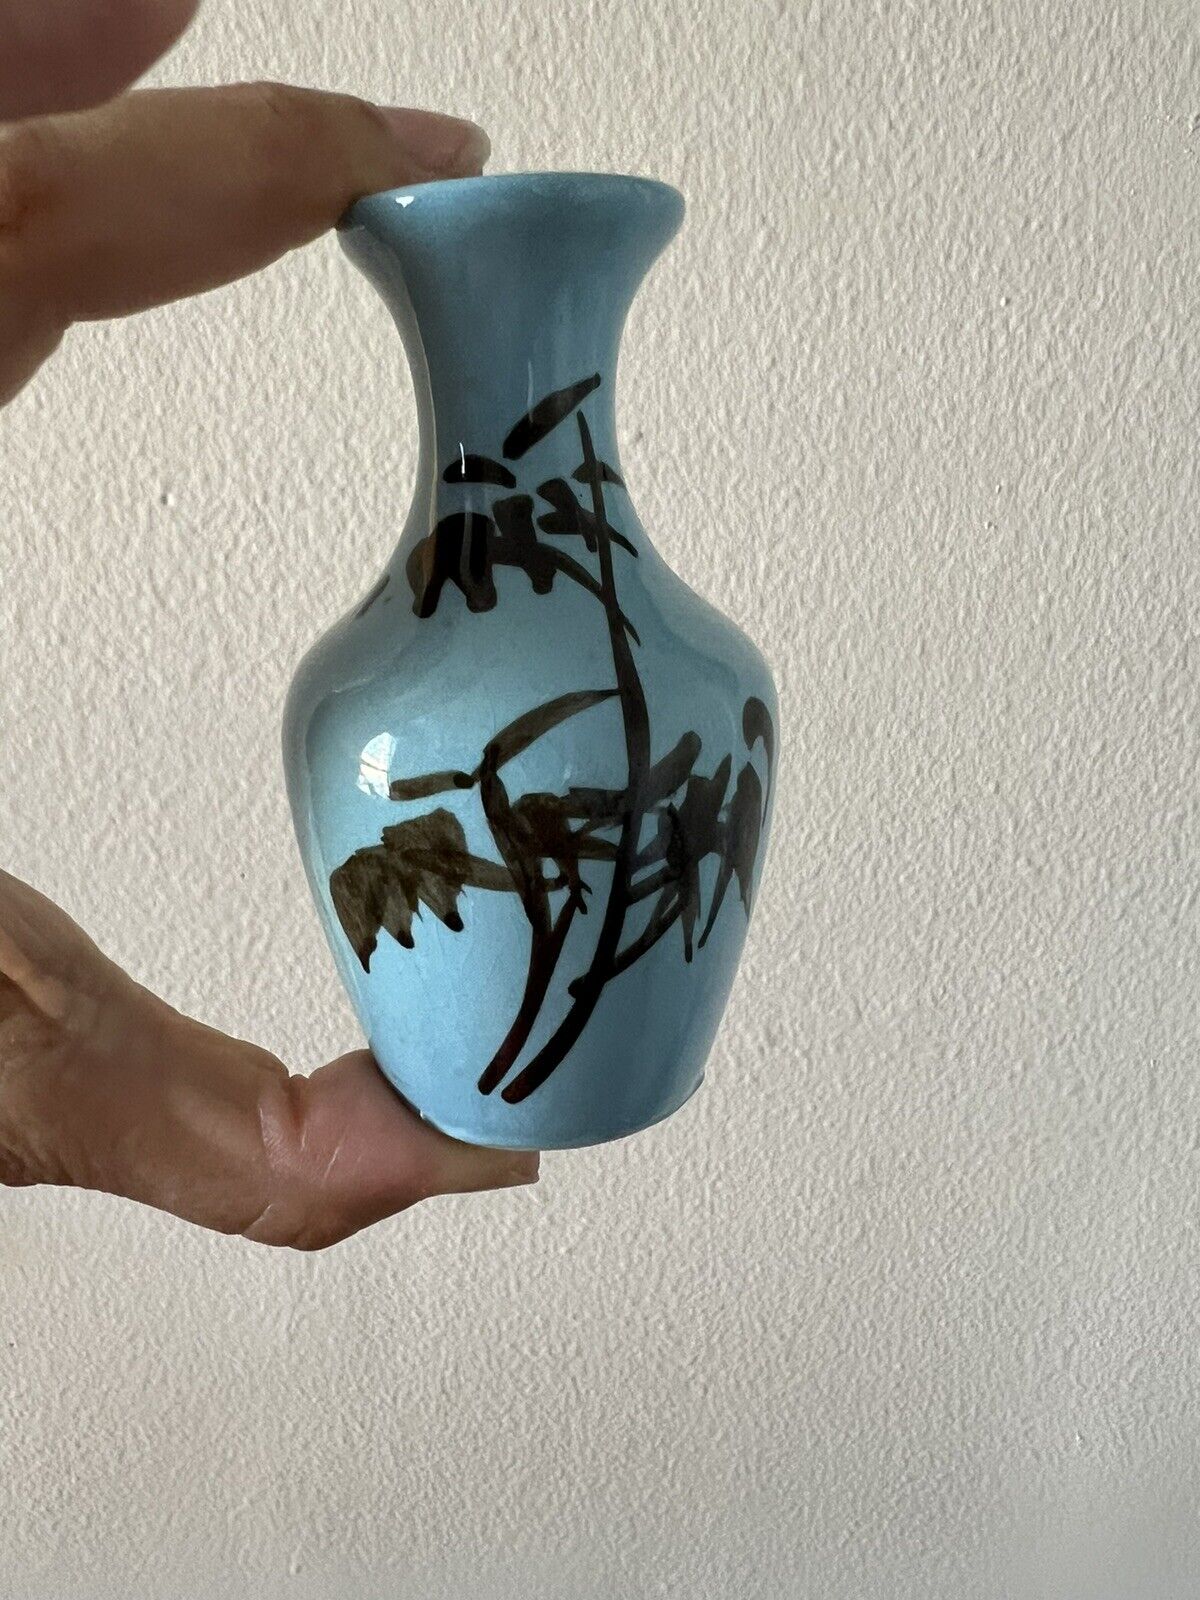 Small Blue Bud Vase Ceramic Hand Painted Bamboo Leaves Chinese Brush Stroke Styl